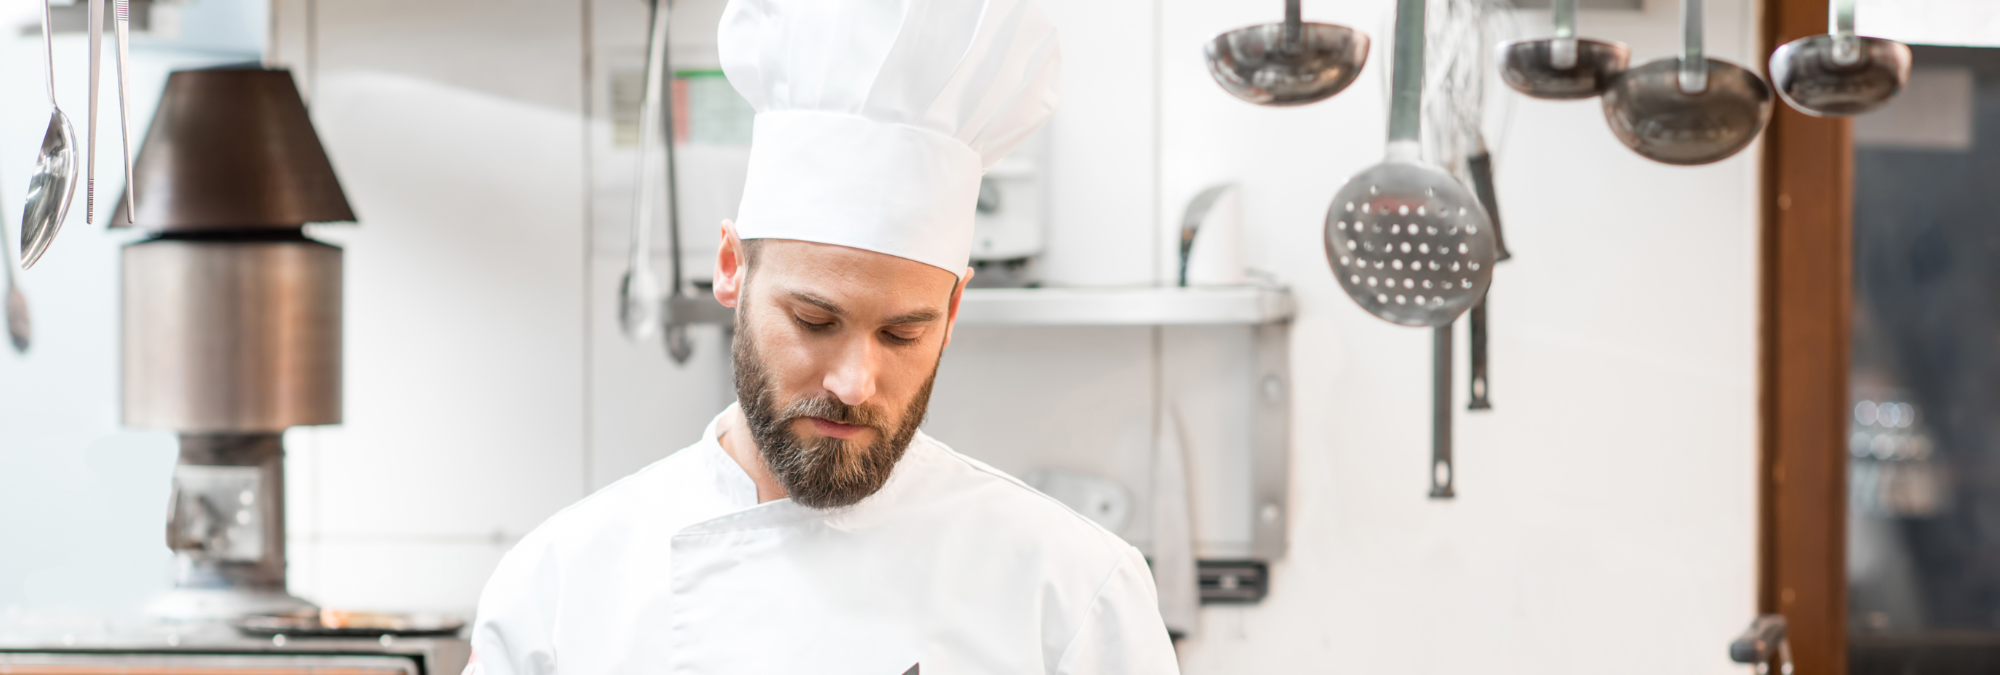 How to Apply the Principles of Circular Economy in Commercial Kitchens